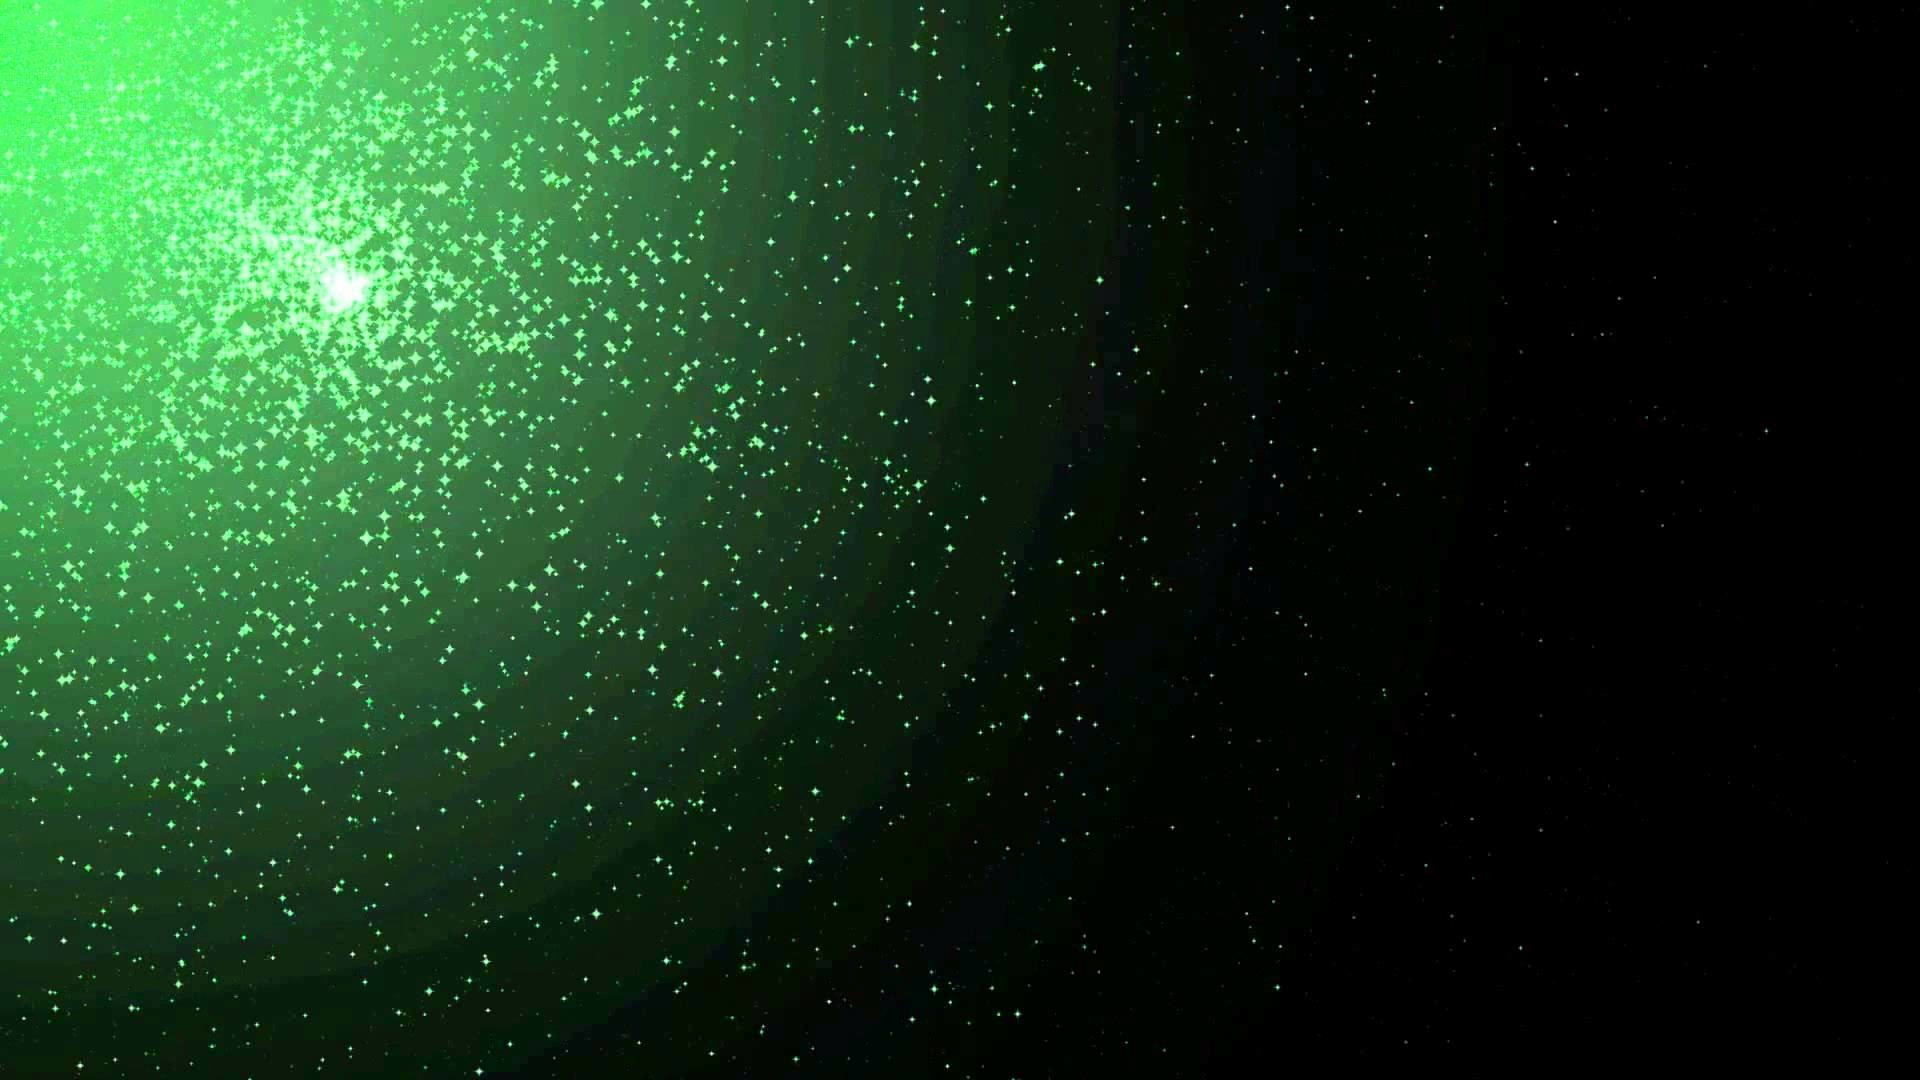 1920x1080 Green Stars Across Black Background ANIMATION FREE FOOTAGE HD - YouTube